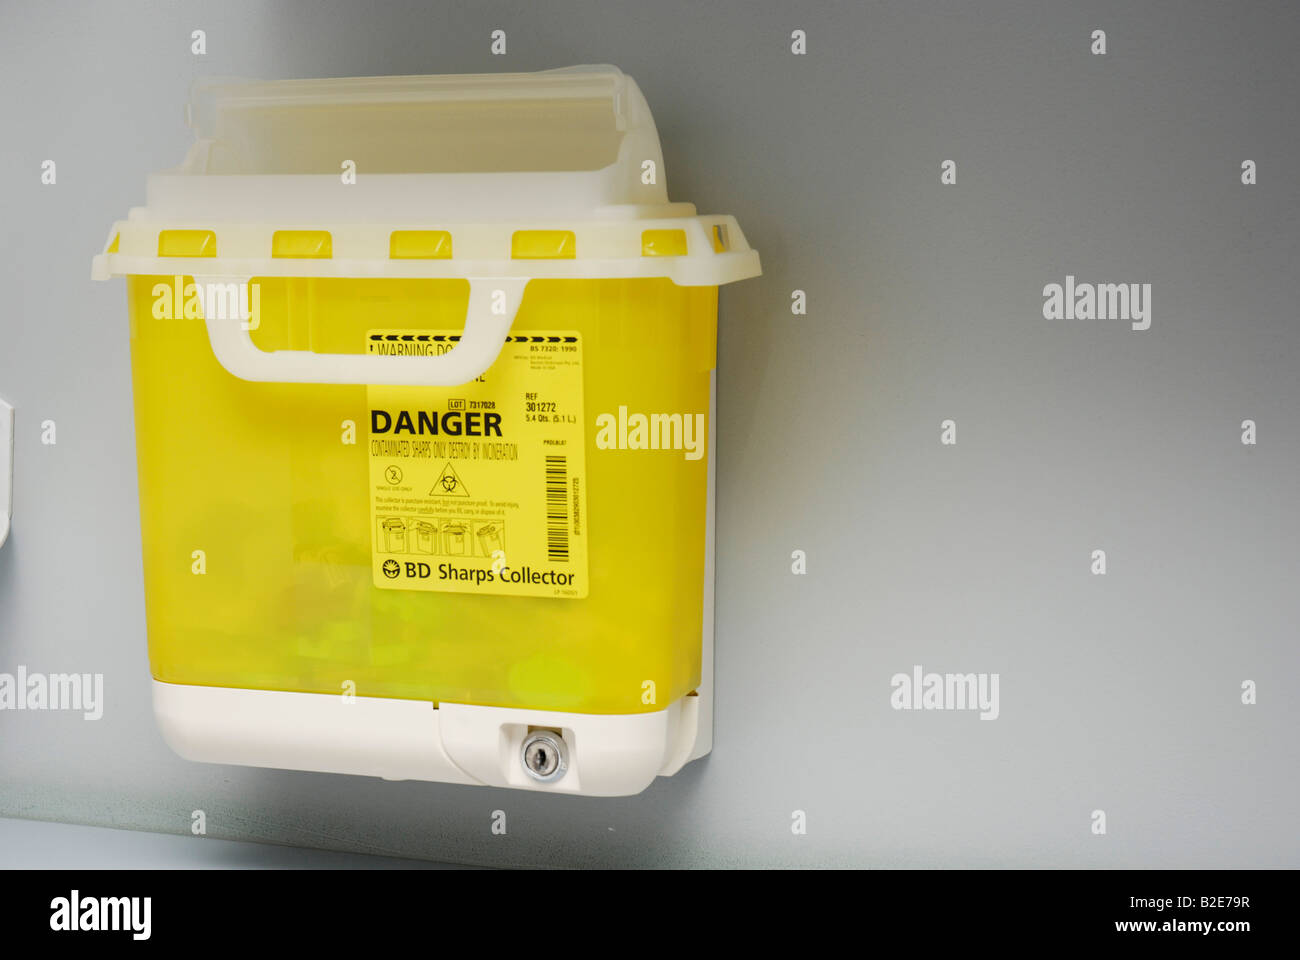 Sharps collector mounted on a wall for the disposal of syringes and other hazardous materials Stock Photo